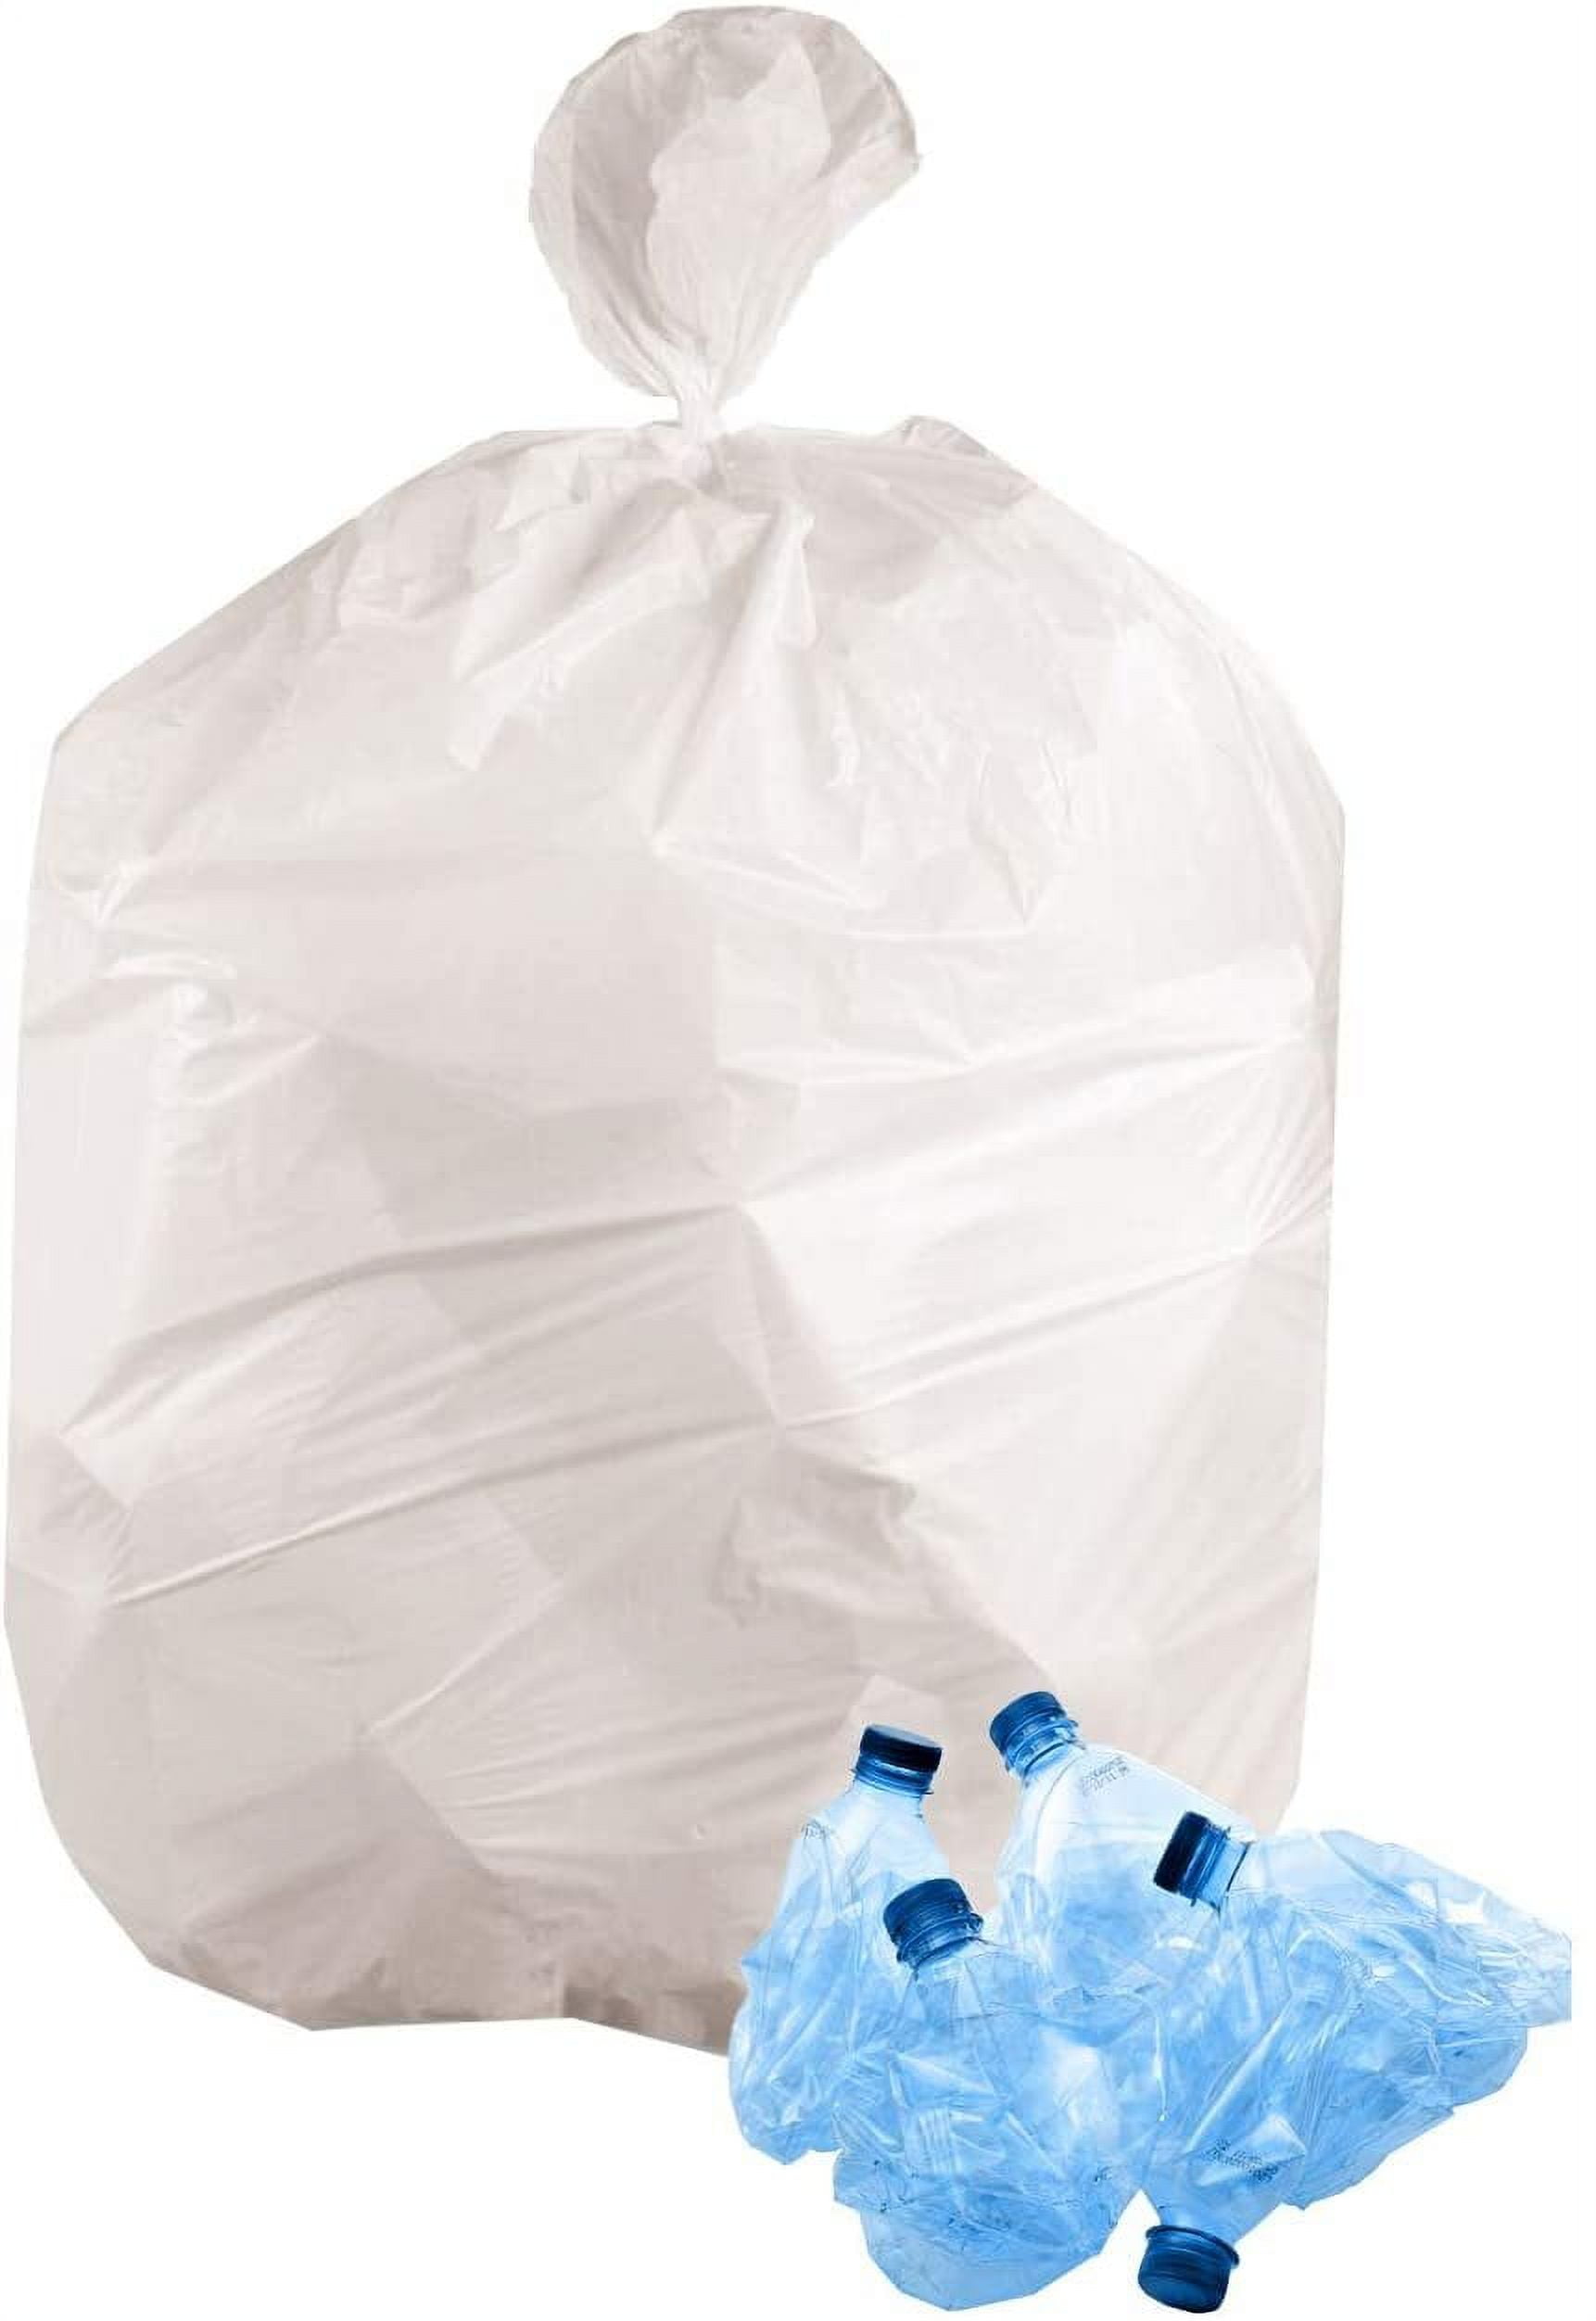 30 GAL Semi-Clear Trash bags Trash Can Liner (75 Count) Clear Garbage Bags  for Home, Hospital, Wastebaskets, Recycling, Storage, Outdoor. Lightweight.  3 Coreless Rolls (20-30 Gallon) price in UAE,  UAE